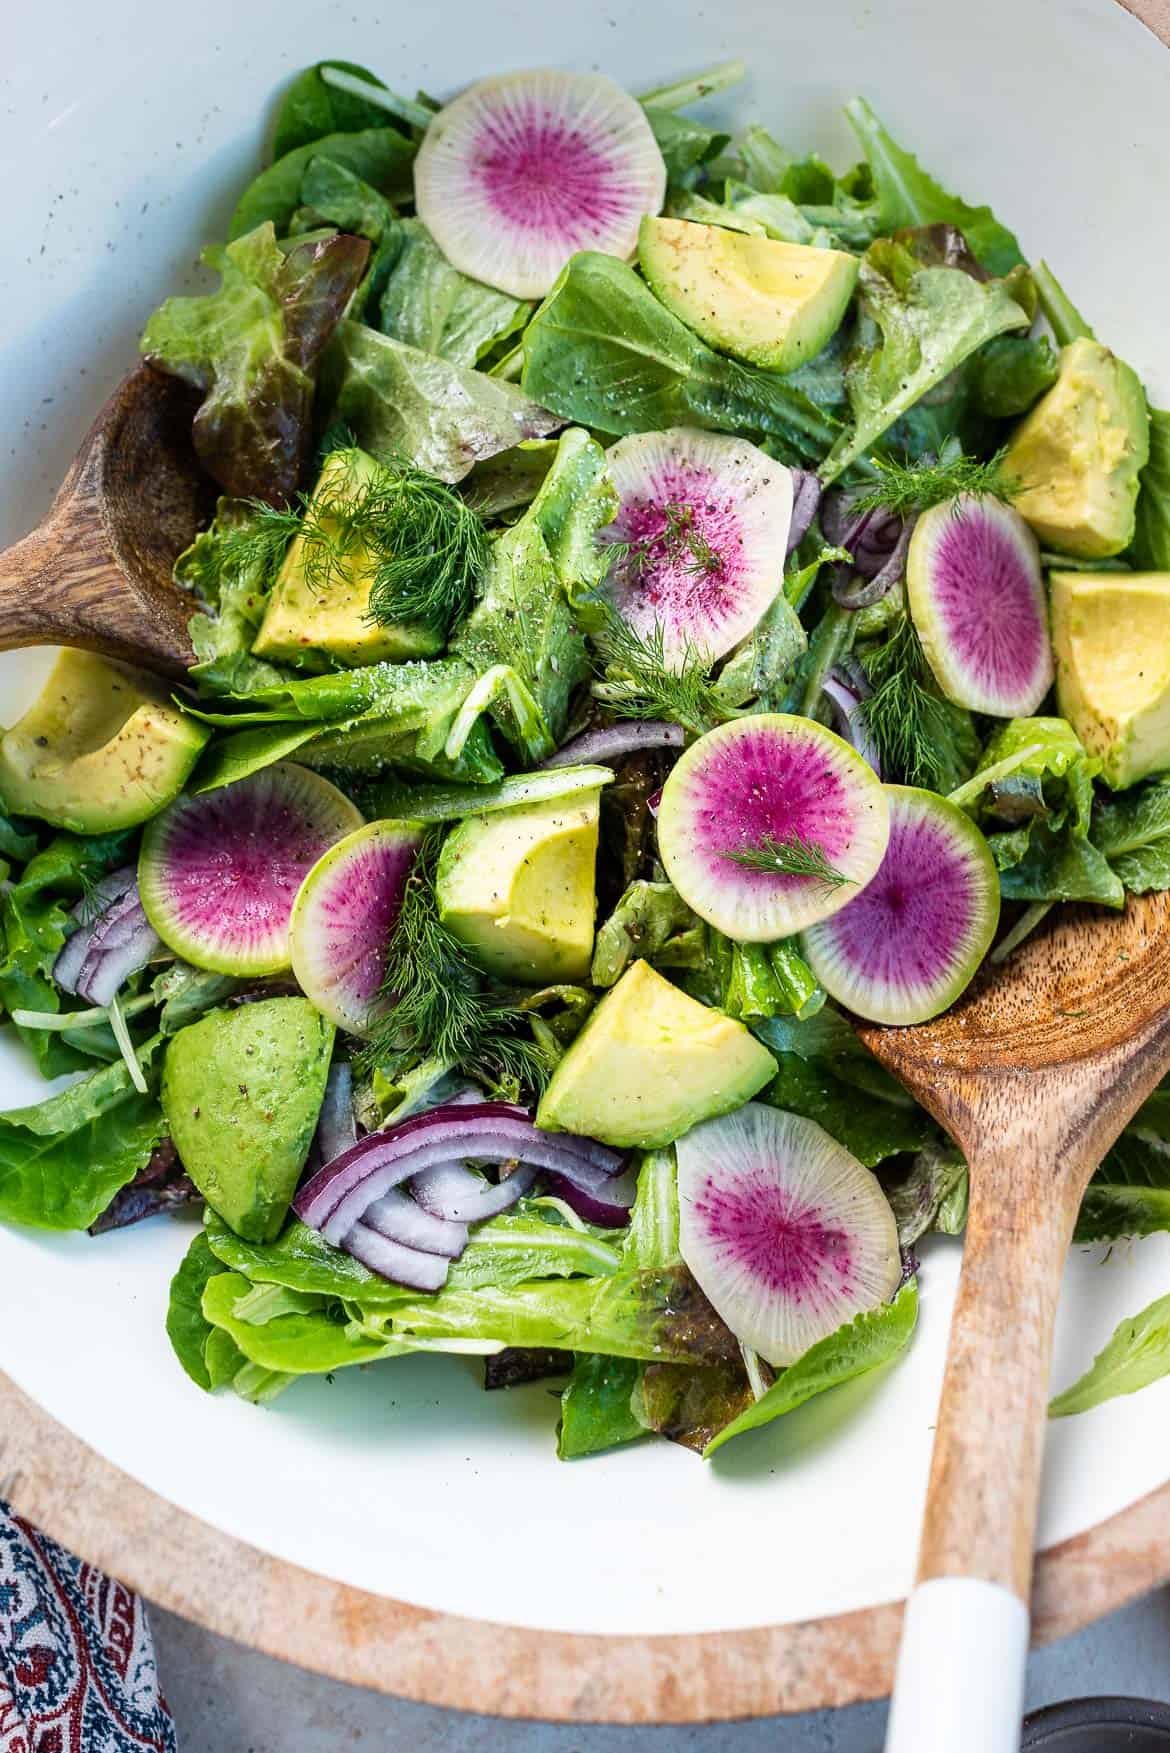 Lettuce Salad with Mayonnaise Dressing, watermelon radishes, avocados, red onion, and dill in a large salad bowl.